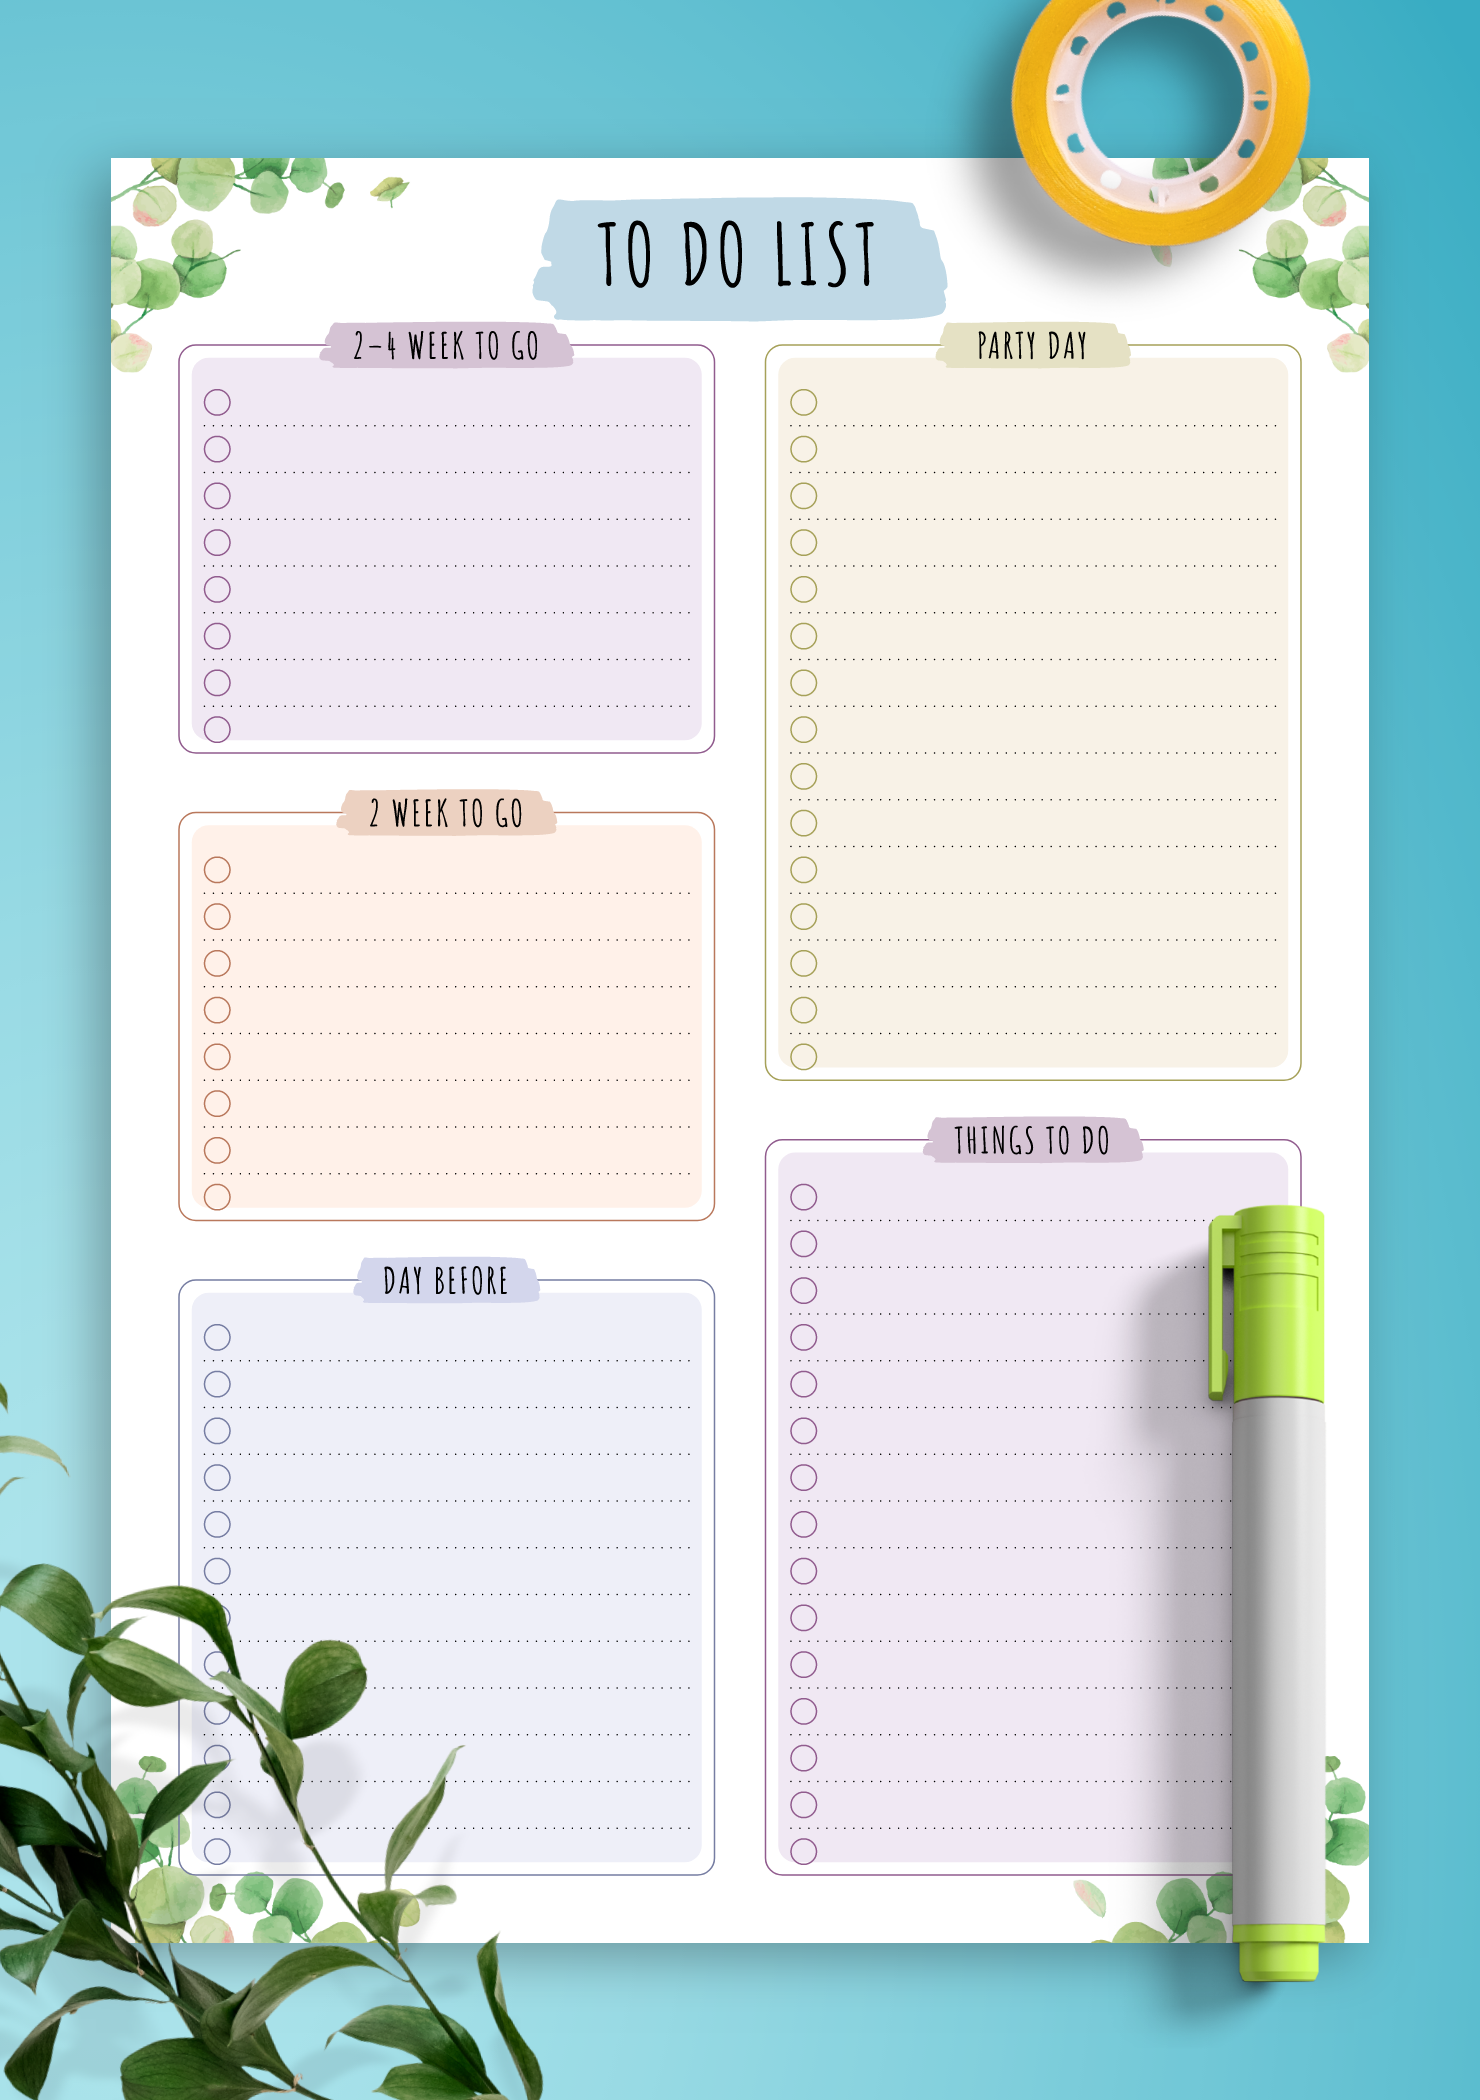 Download Printable Party To Do List Floral Style PDF